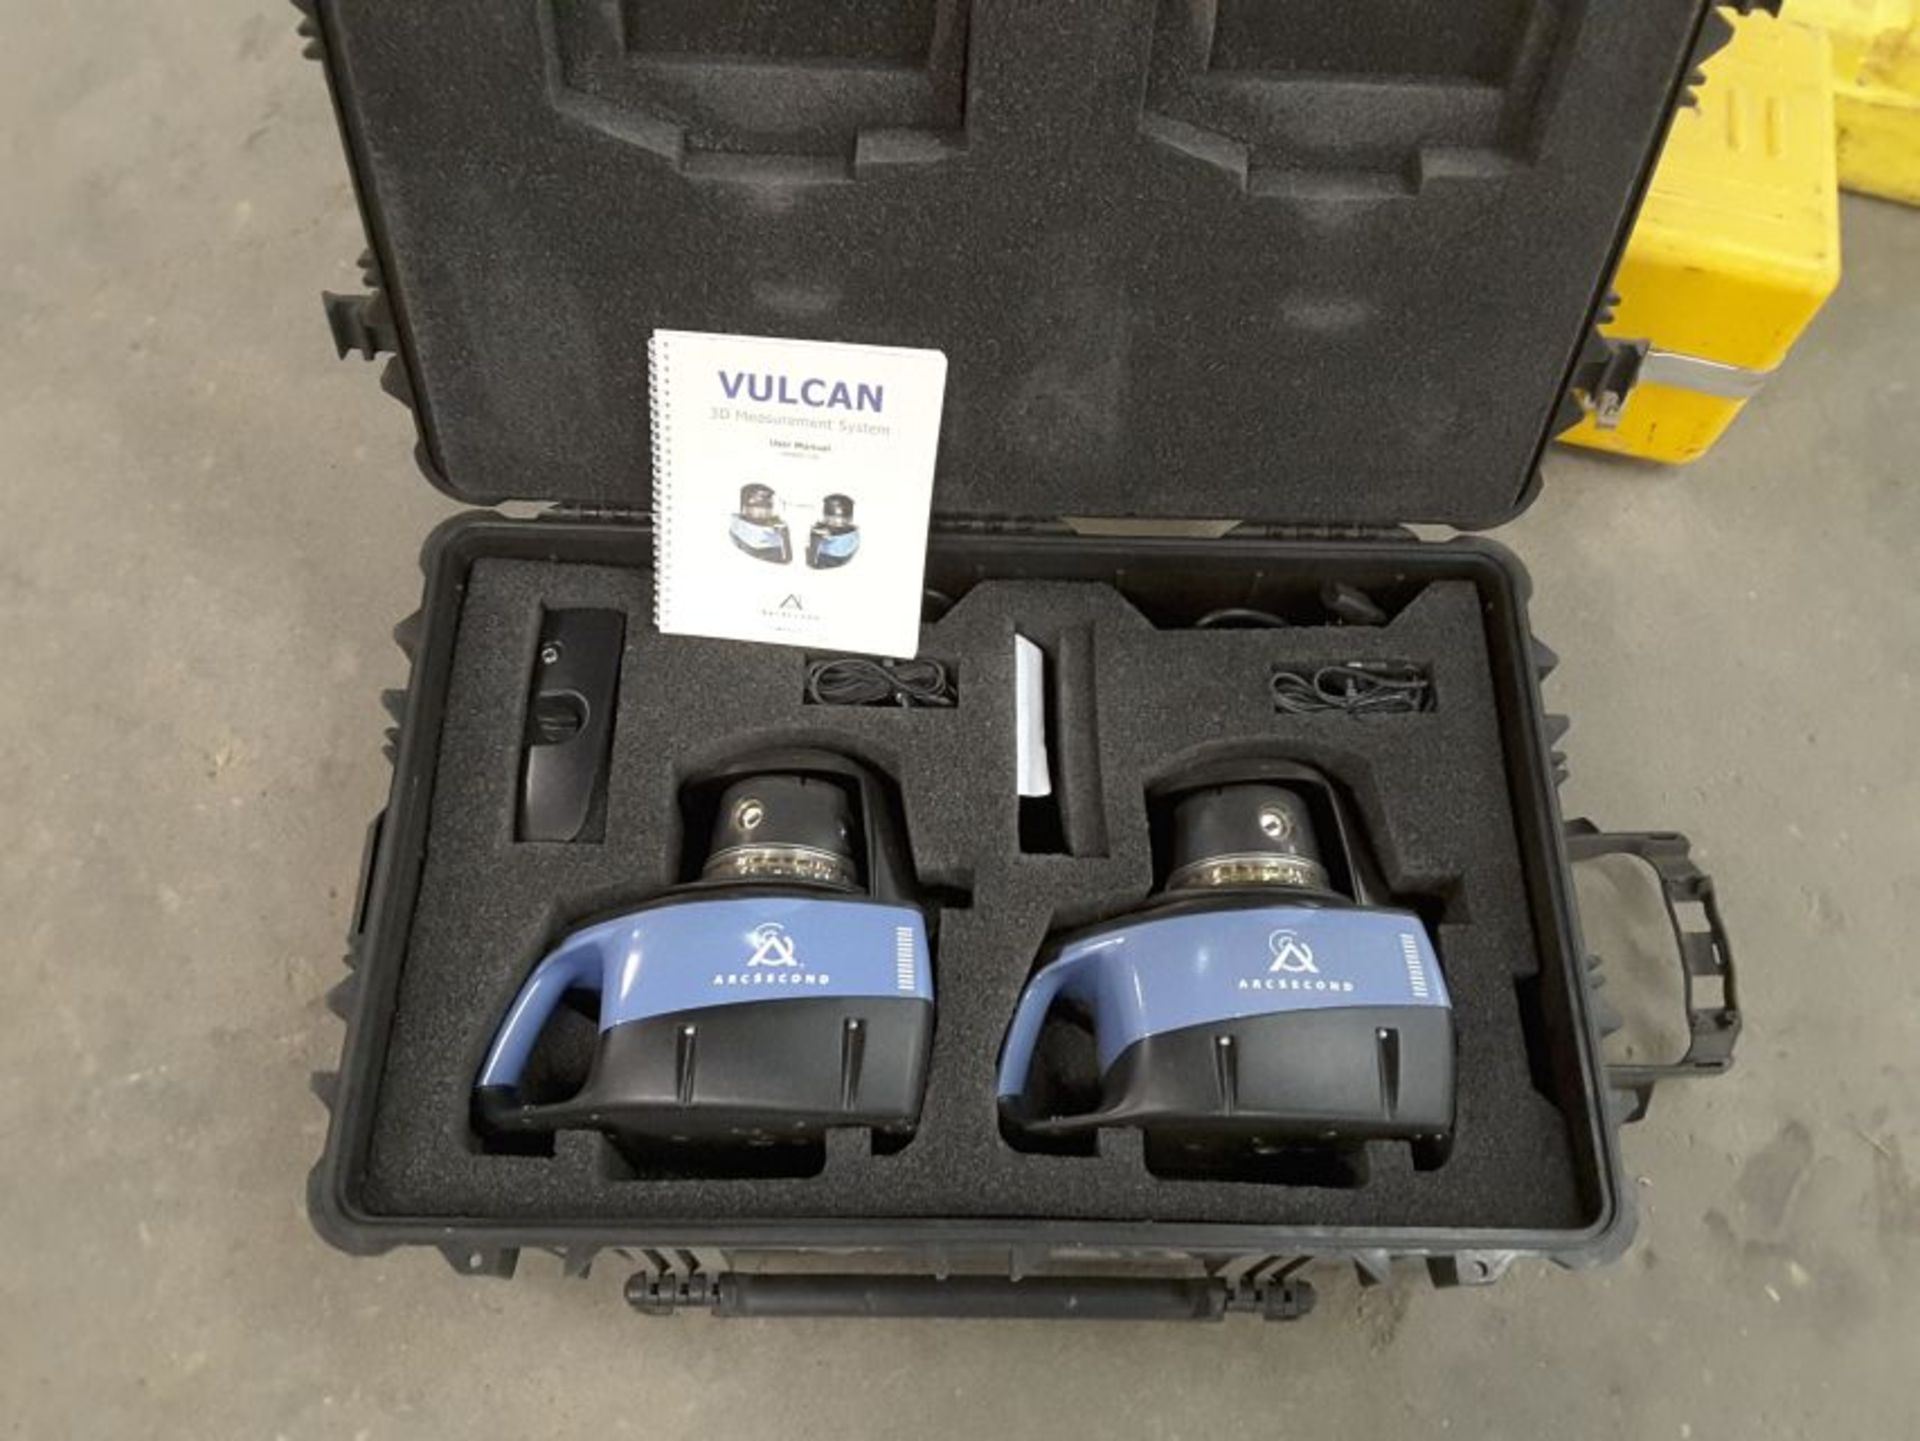 Vulcan ArcSecond 3D measurement system in hard case with accessories